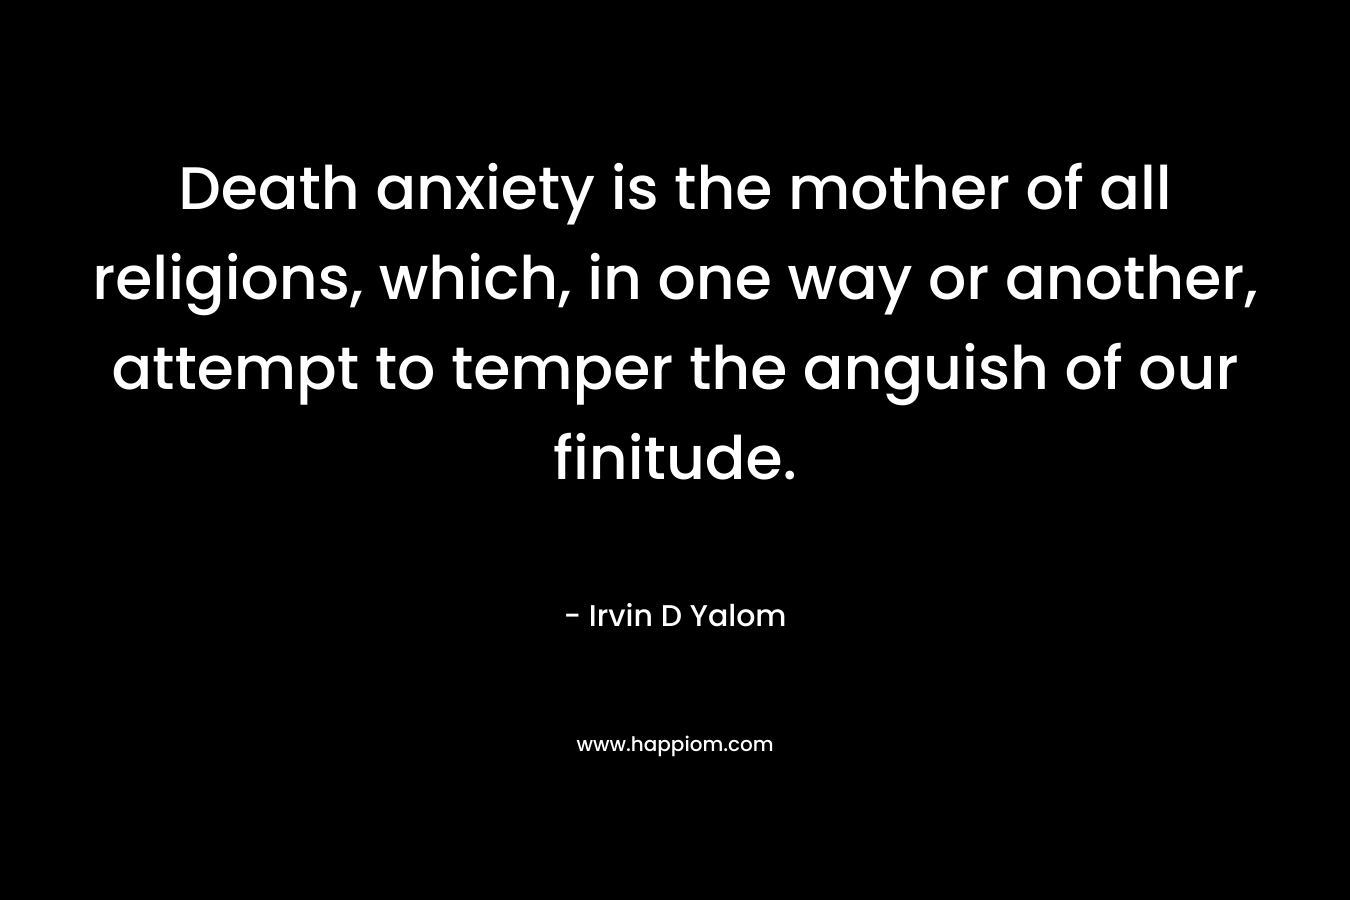 Death anxiety is the mother of all religions, which, in one way or another, attempt to temper the anguish of our finitude. – Irvin D Yalom